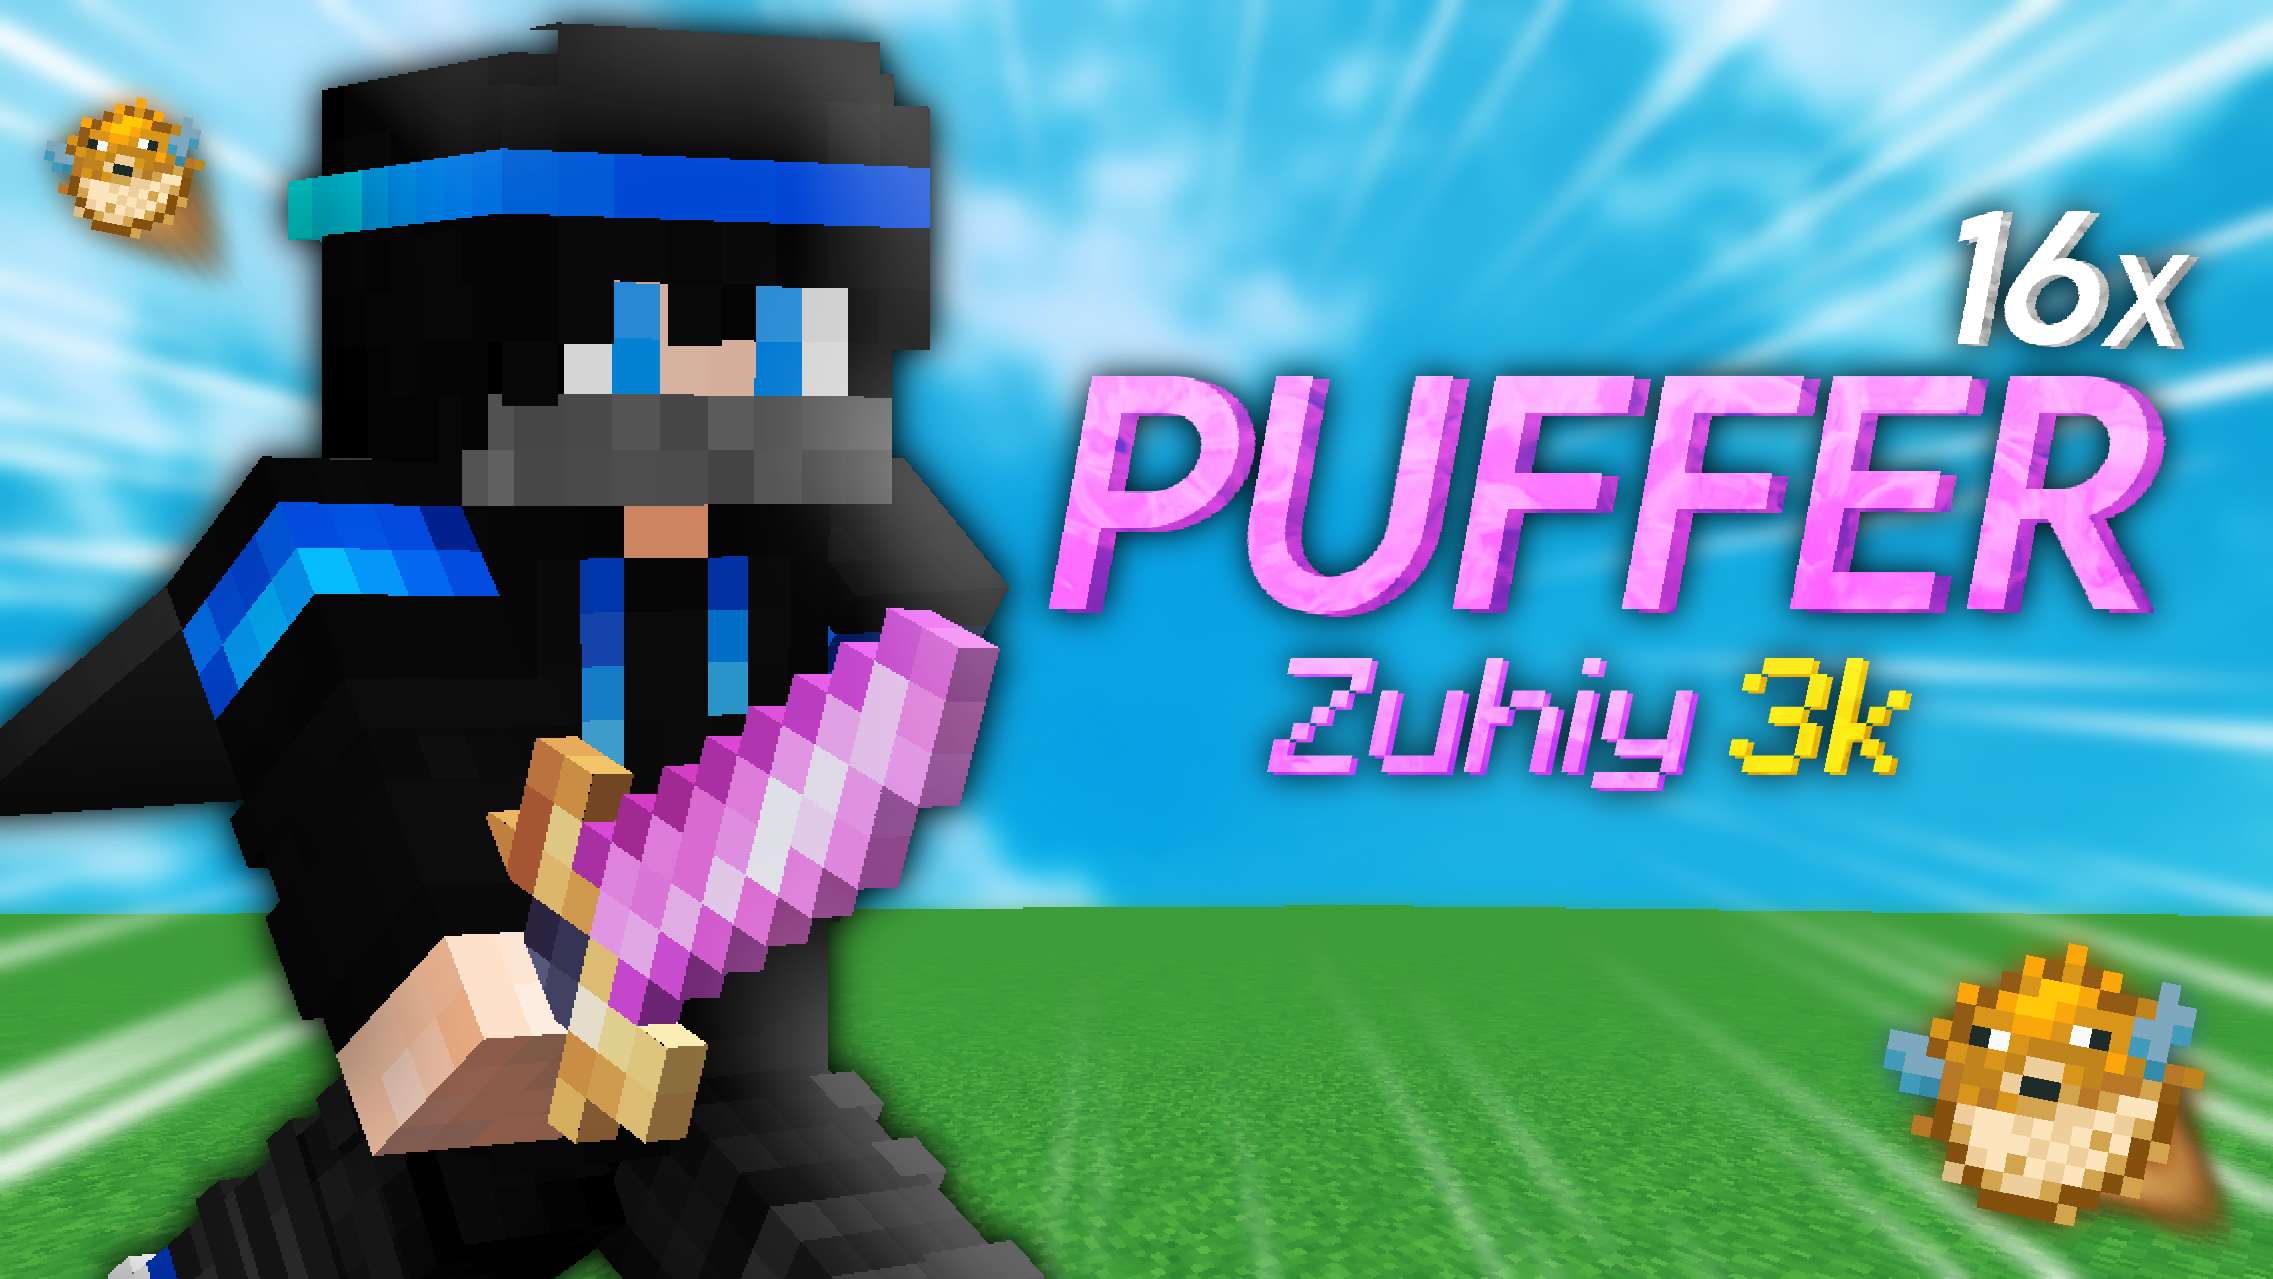 Gallery Banner for PUFFER - (ZUHIY 3K) on PvPRP